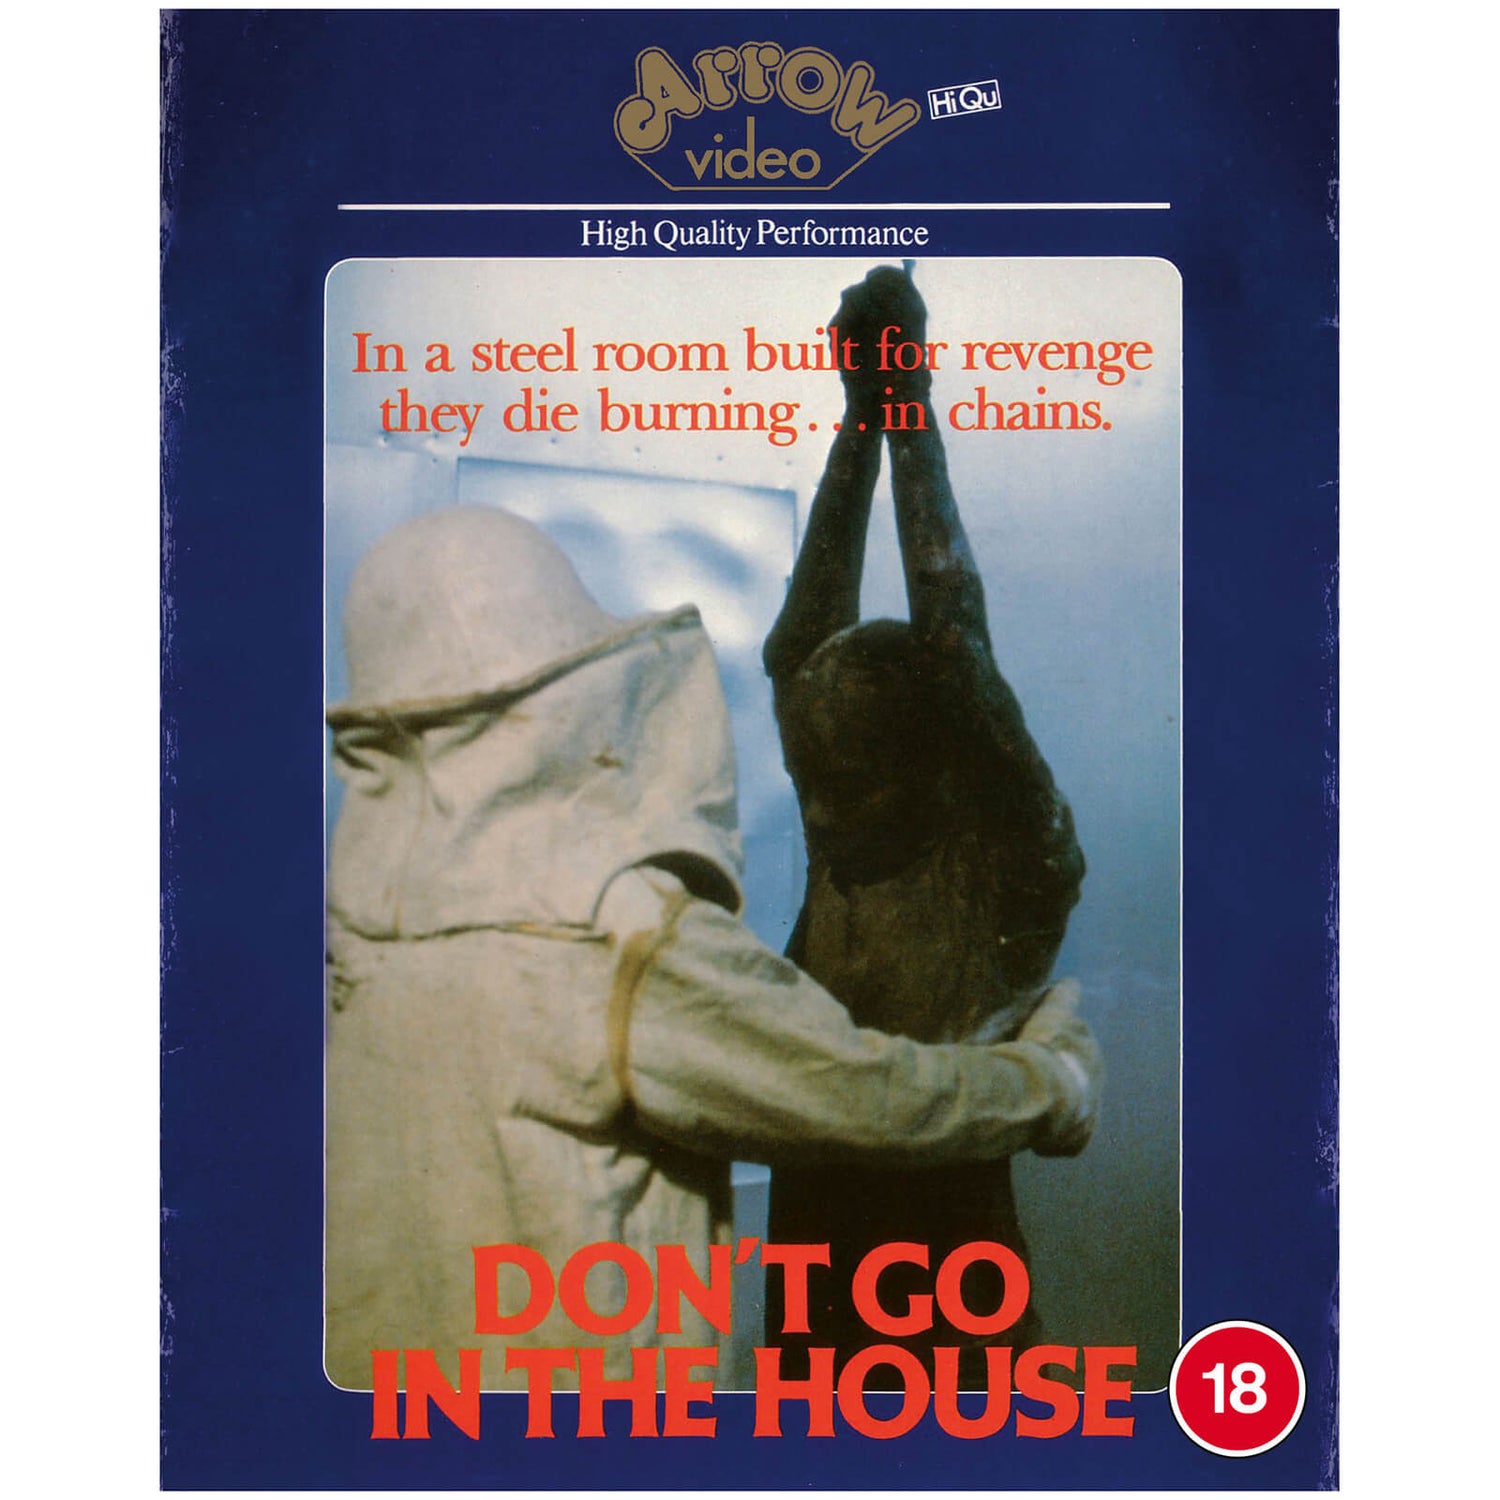 Don't Go in the House - Video Nasty Edition - Arrow Store Exclusive - Limited Edition